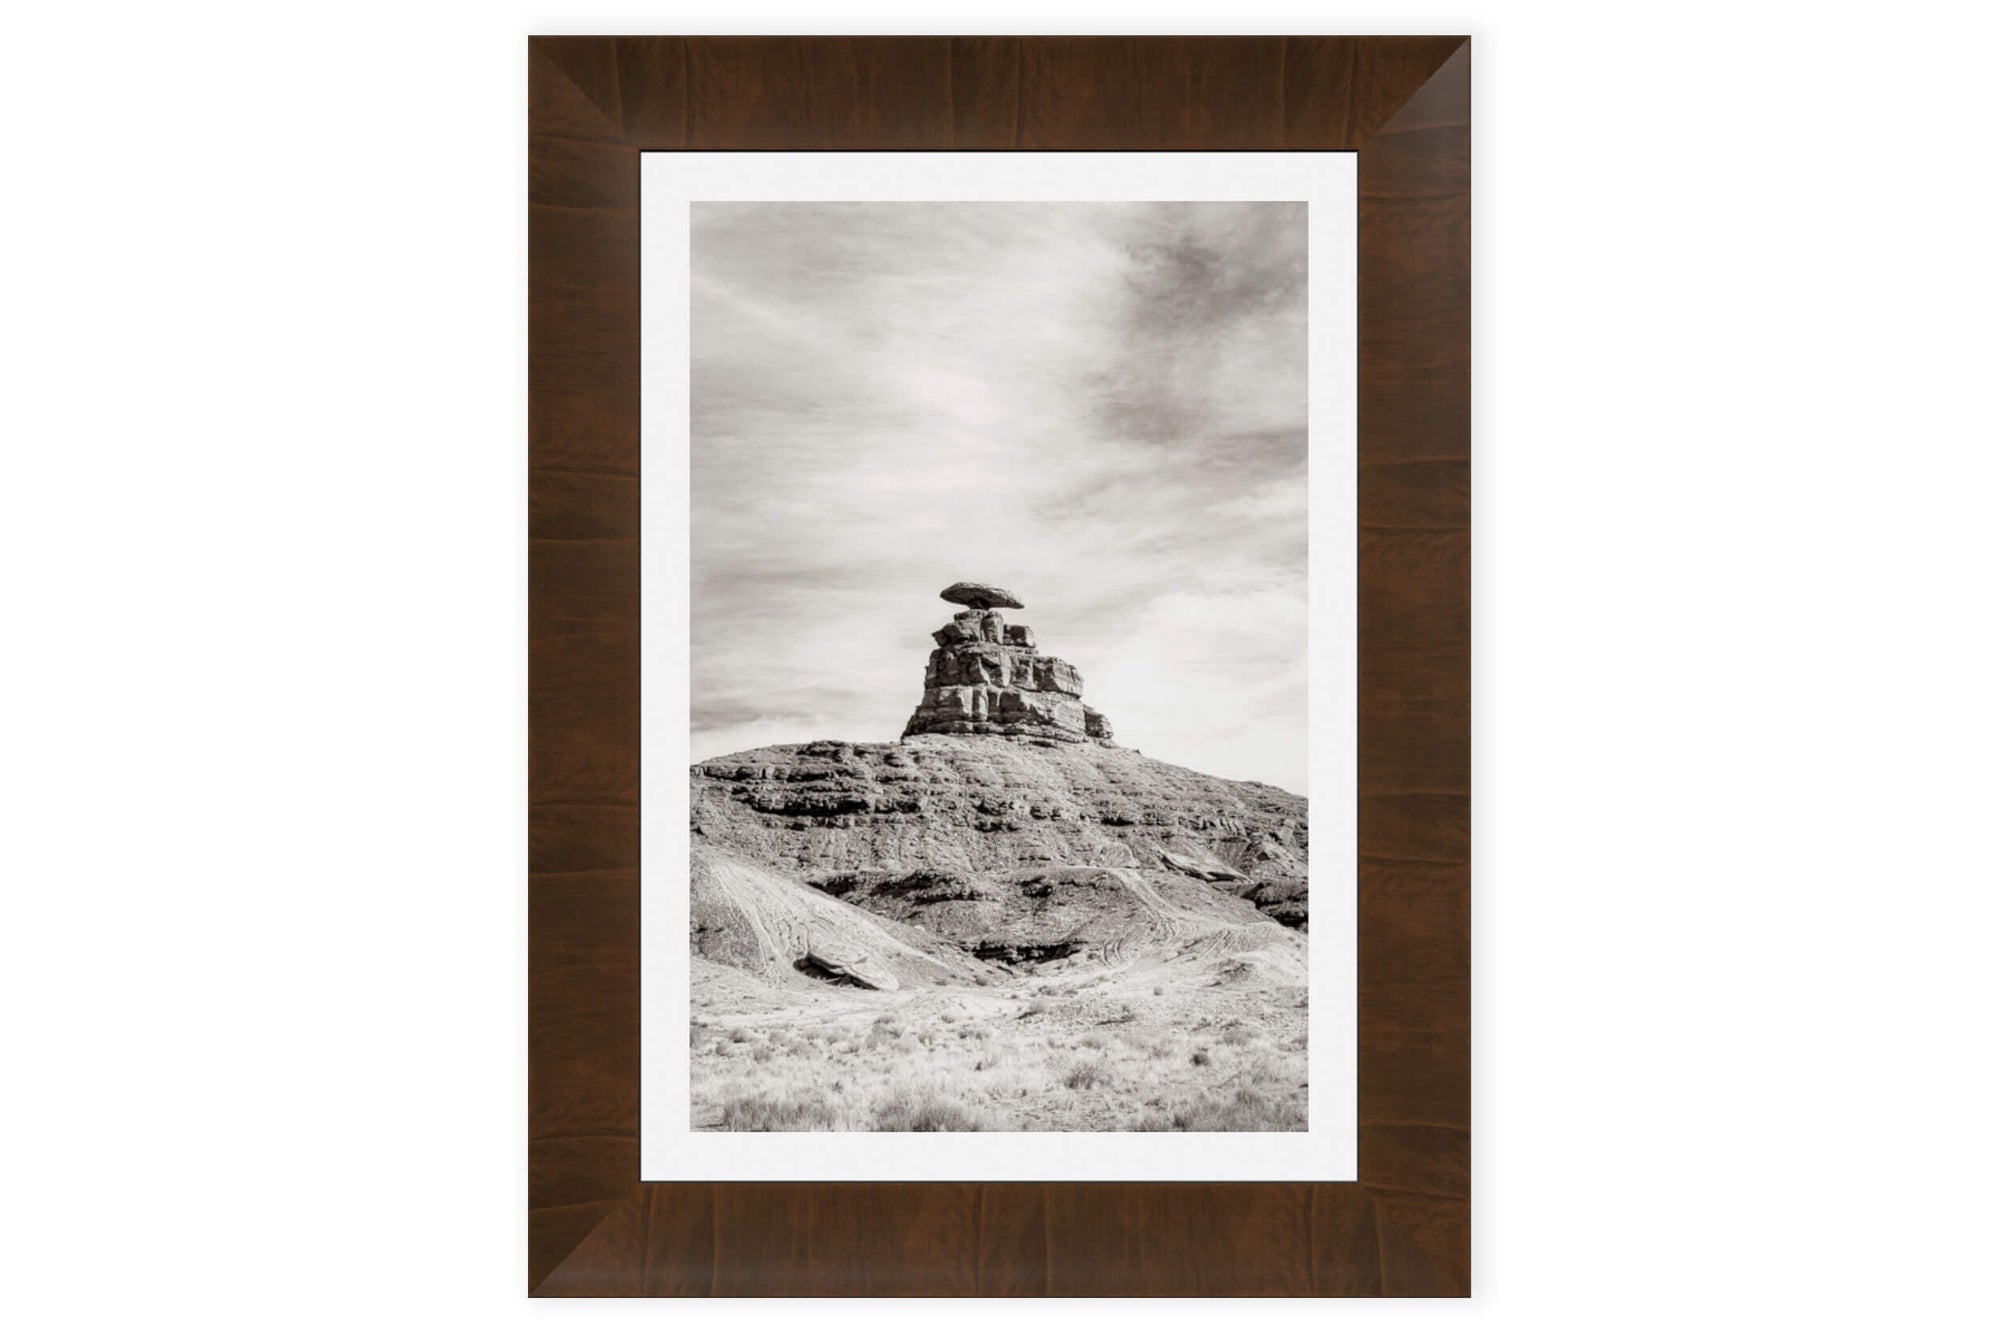 This piece of framed Utah art shows a black and white photo of Mexican Hat.